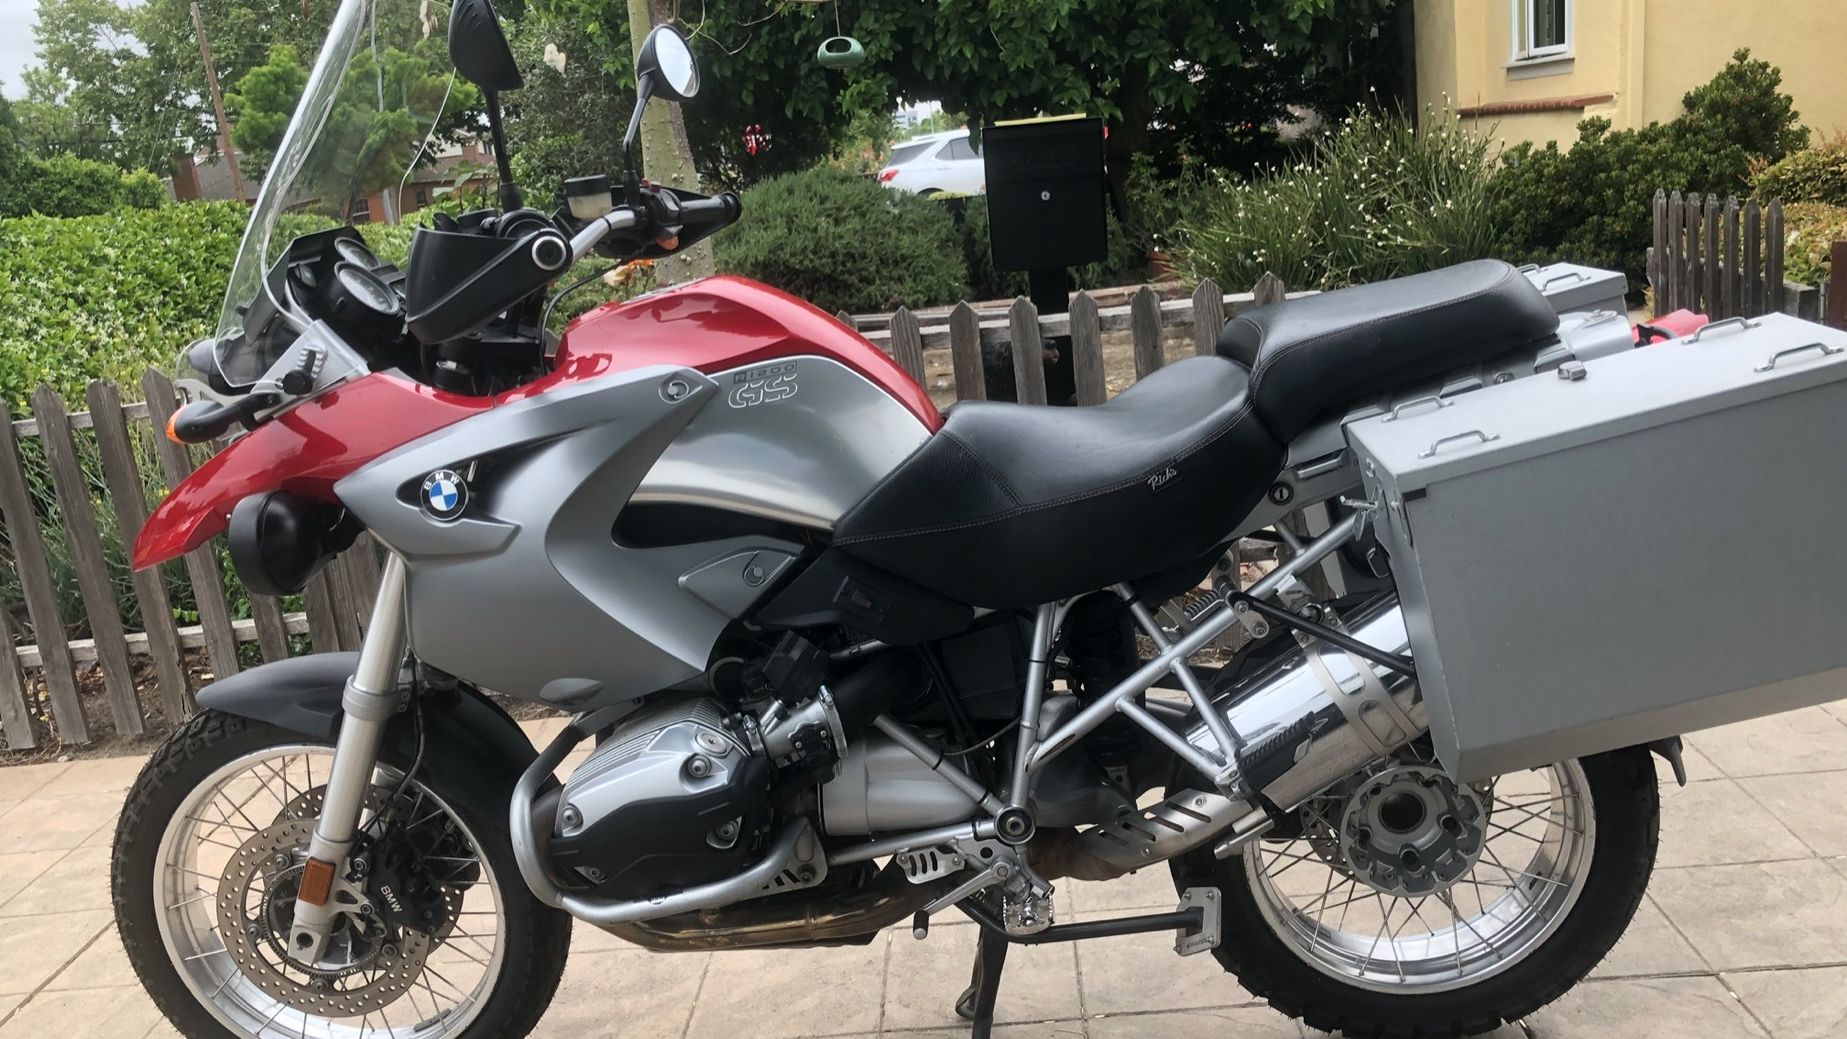 Motorcycle Rentals done right. Find BMW motorcycle's for rent near San